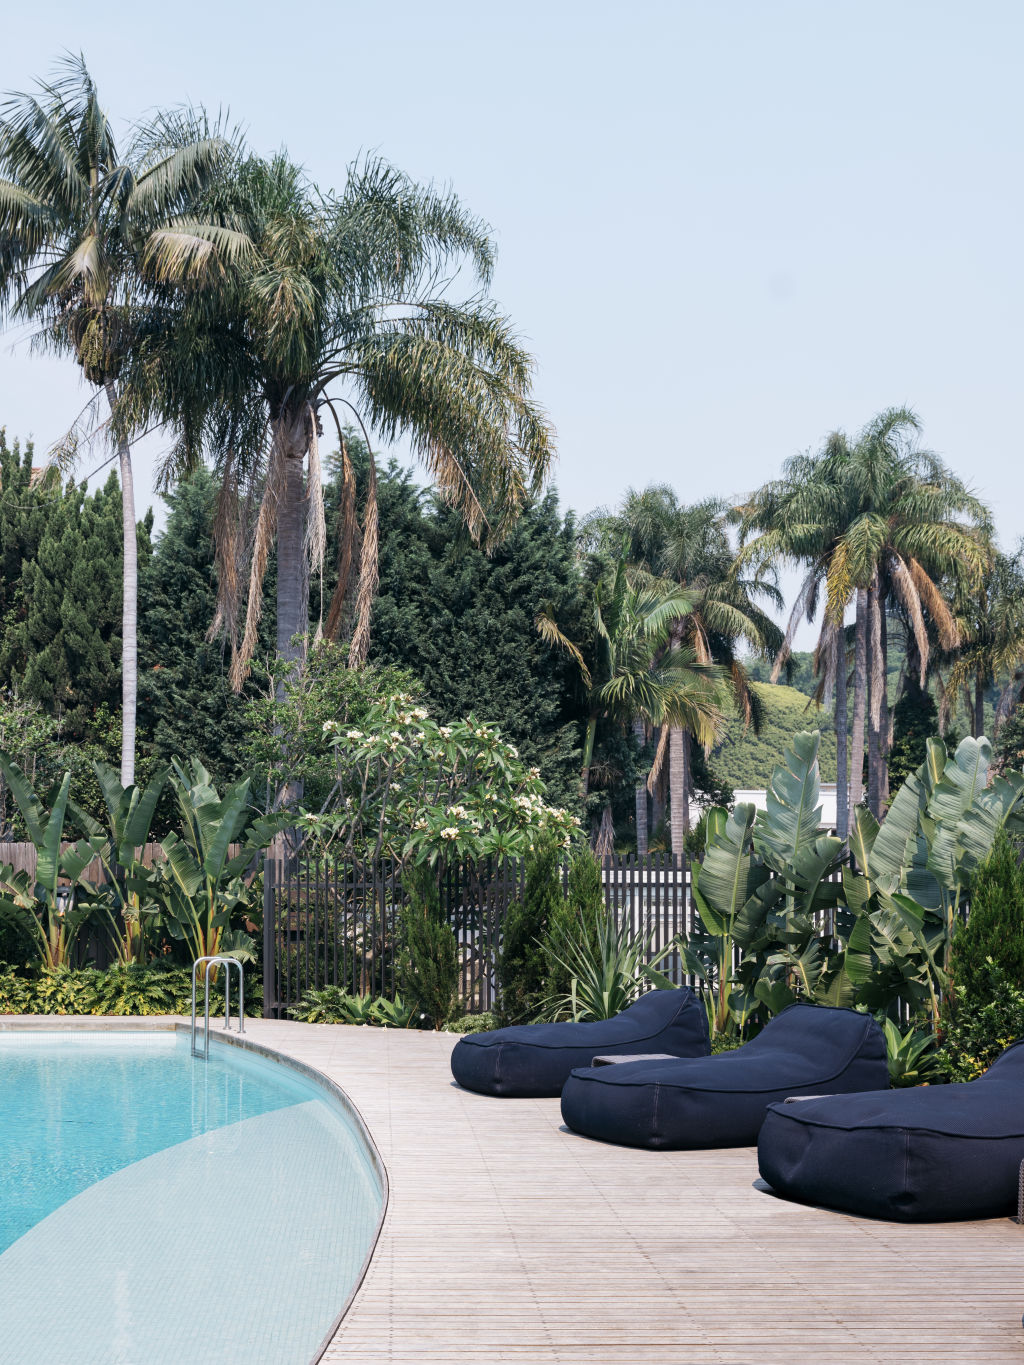 In the gardens, a crescent-shaped pool shimmers. Photo: Felix Forest